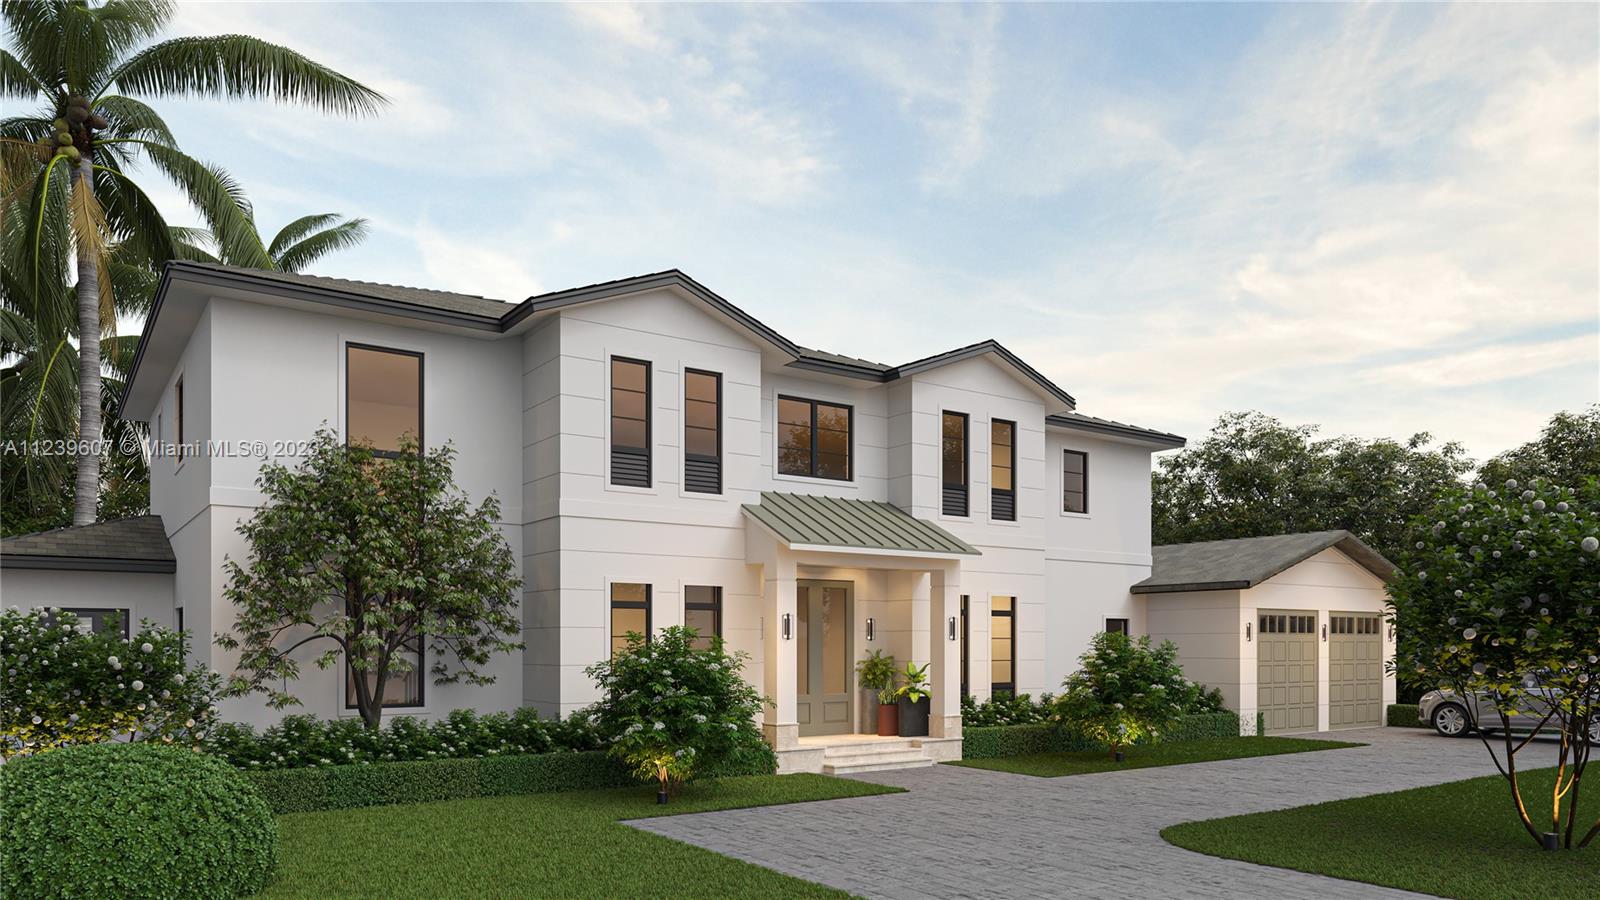 This new construction Hollub home embodies the South Florida lifestyle, providing the perfect retreat- nestled on an idyllic Pinecrest street, offering a world of privacy, moments from top schools, recreation and Miami hot spots. Stunning modern farmhouse with legendary timeless design and quality, featuring 6 bedrooms and 7 baths, 6,986 total SF, elevator, exceptional living and entertaining spaces with gorgeous views of the artful landscape and pool beyond. Additional features include a custom kitchen with Wolf, Sub-Zero, plus 2 en suite bedrooms/flex rooms on the 1st floor. The 2nd floor’s luxurious owner's suite has a glamorous bathroom, huge closets, & a large private terrace. A loft, elevator, plus 3 additional en suite bedrooms complete the 2d floor. Est. Completion: Dec. 2023